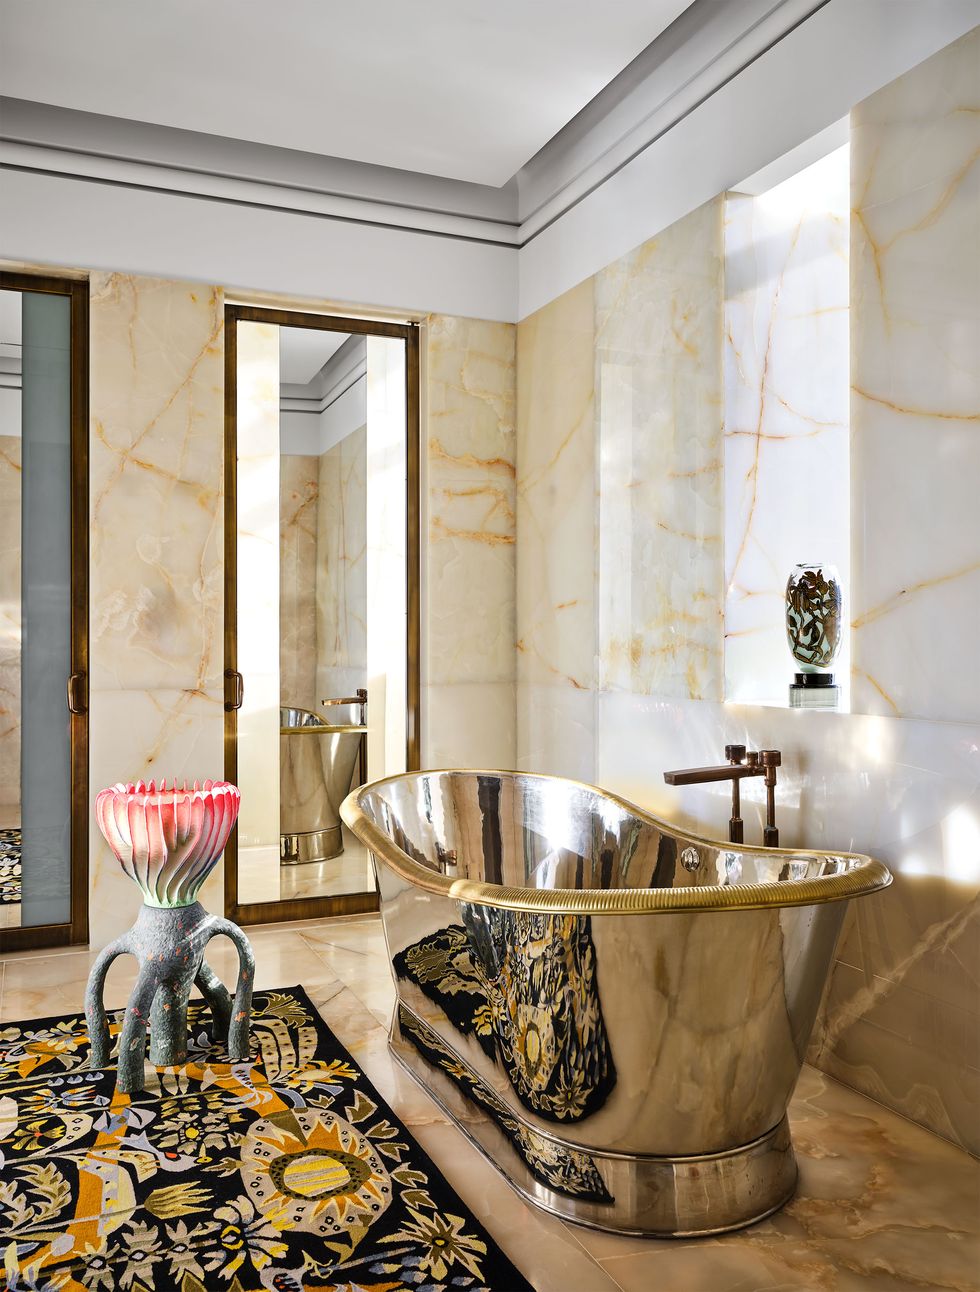 a bathroom with onyx walls with orange and yellow strands, a black background multicolored tapestry on the floor, deep, curved silver bathtub with exterior fittings, art objects on floor and window sill